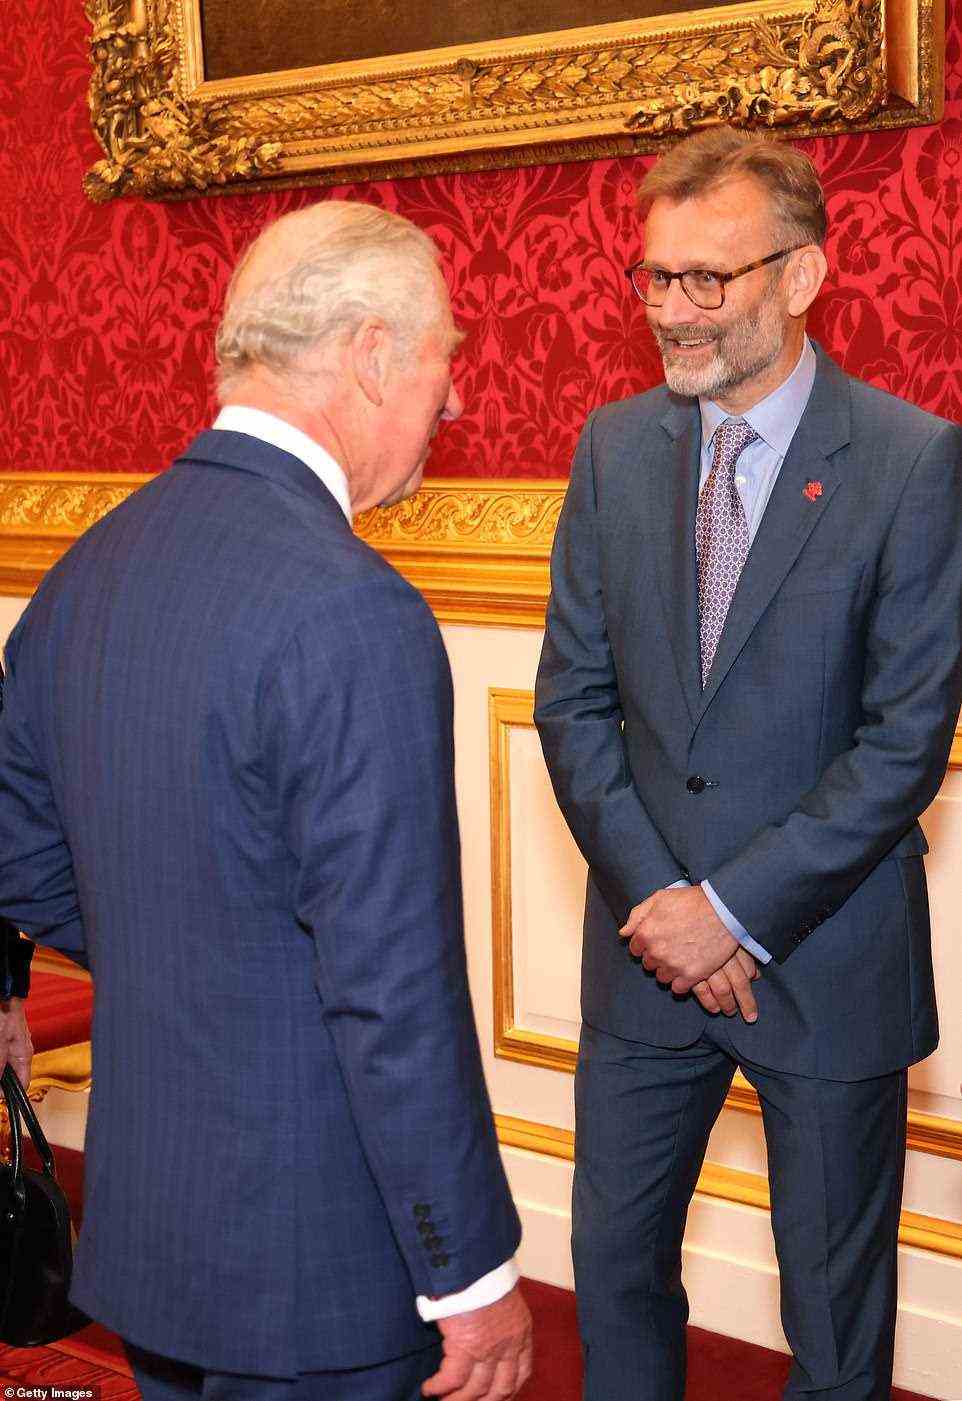 A smartly dressed Hugh Dennis also spoke with Prince Charles during the award's ceremony this evening